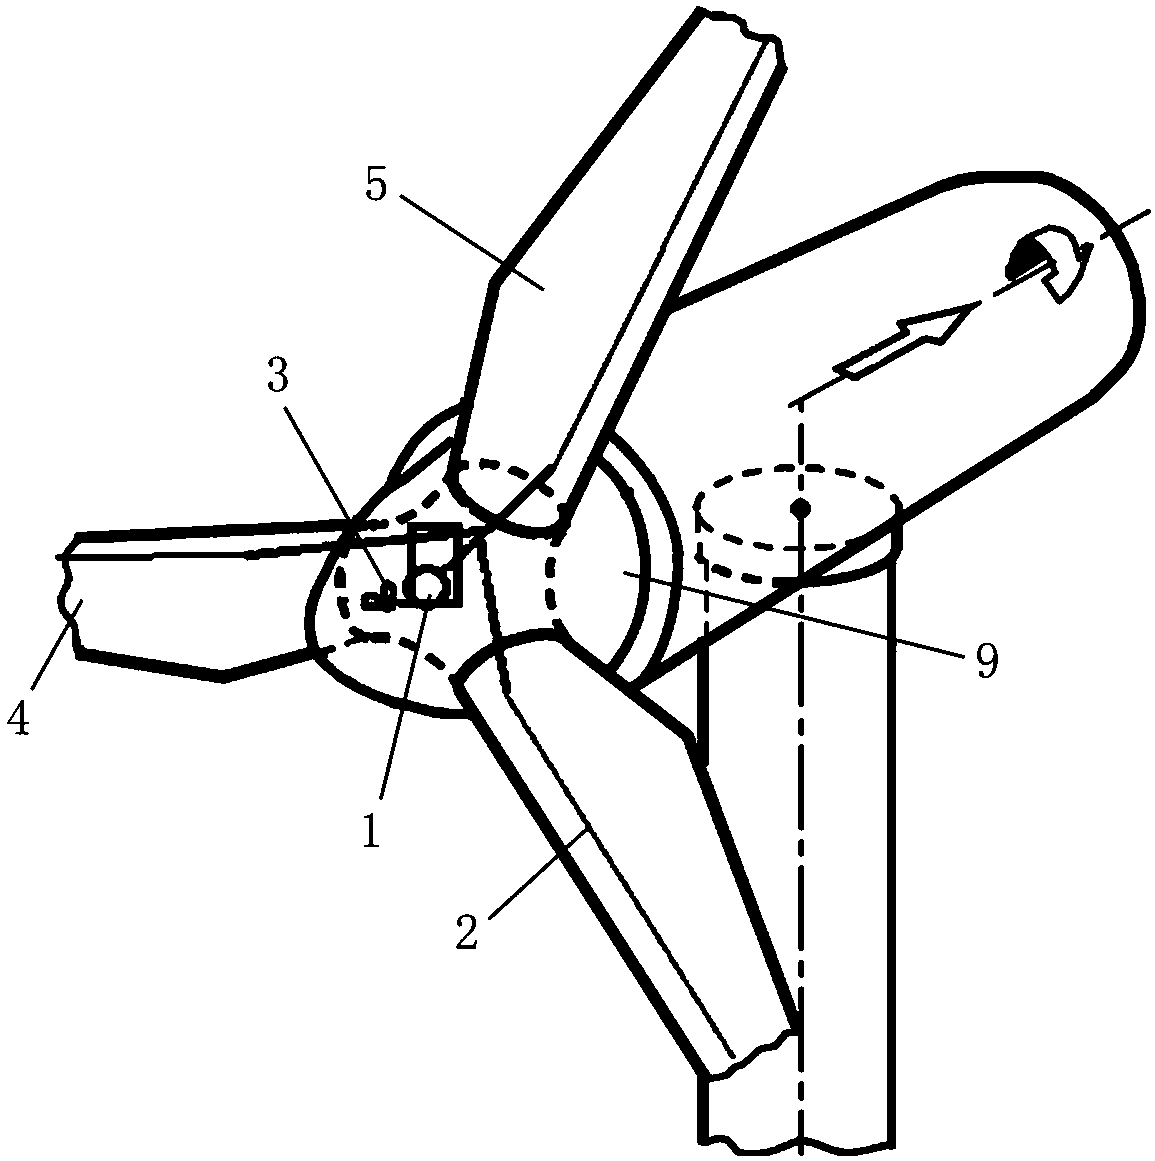 Blades, blade synergistic system and wind generating set